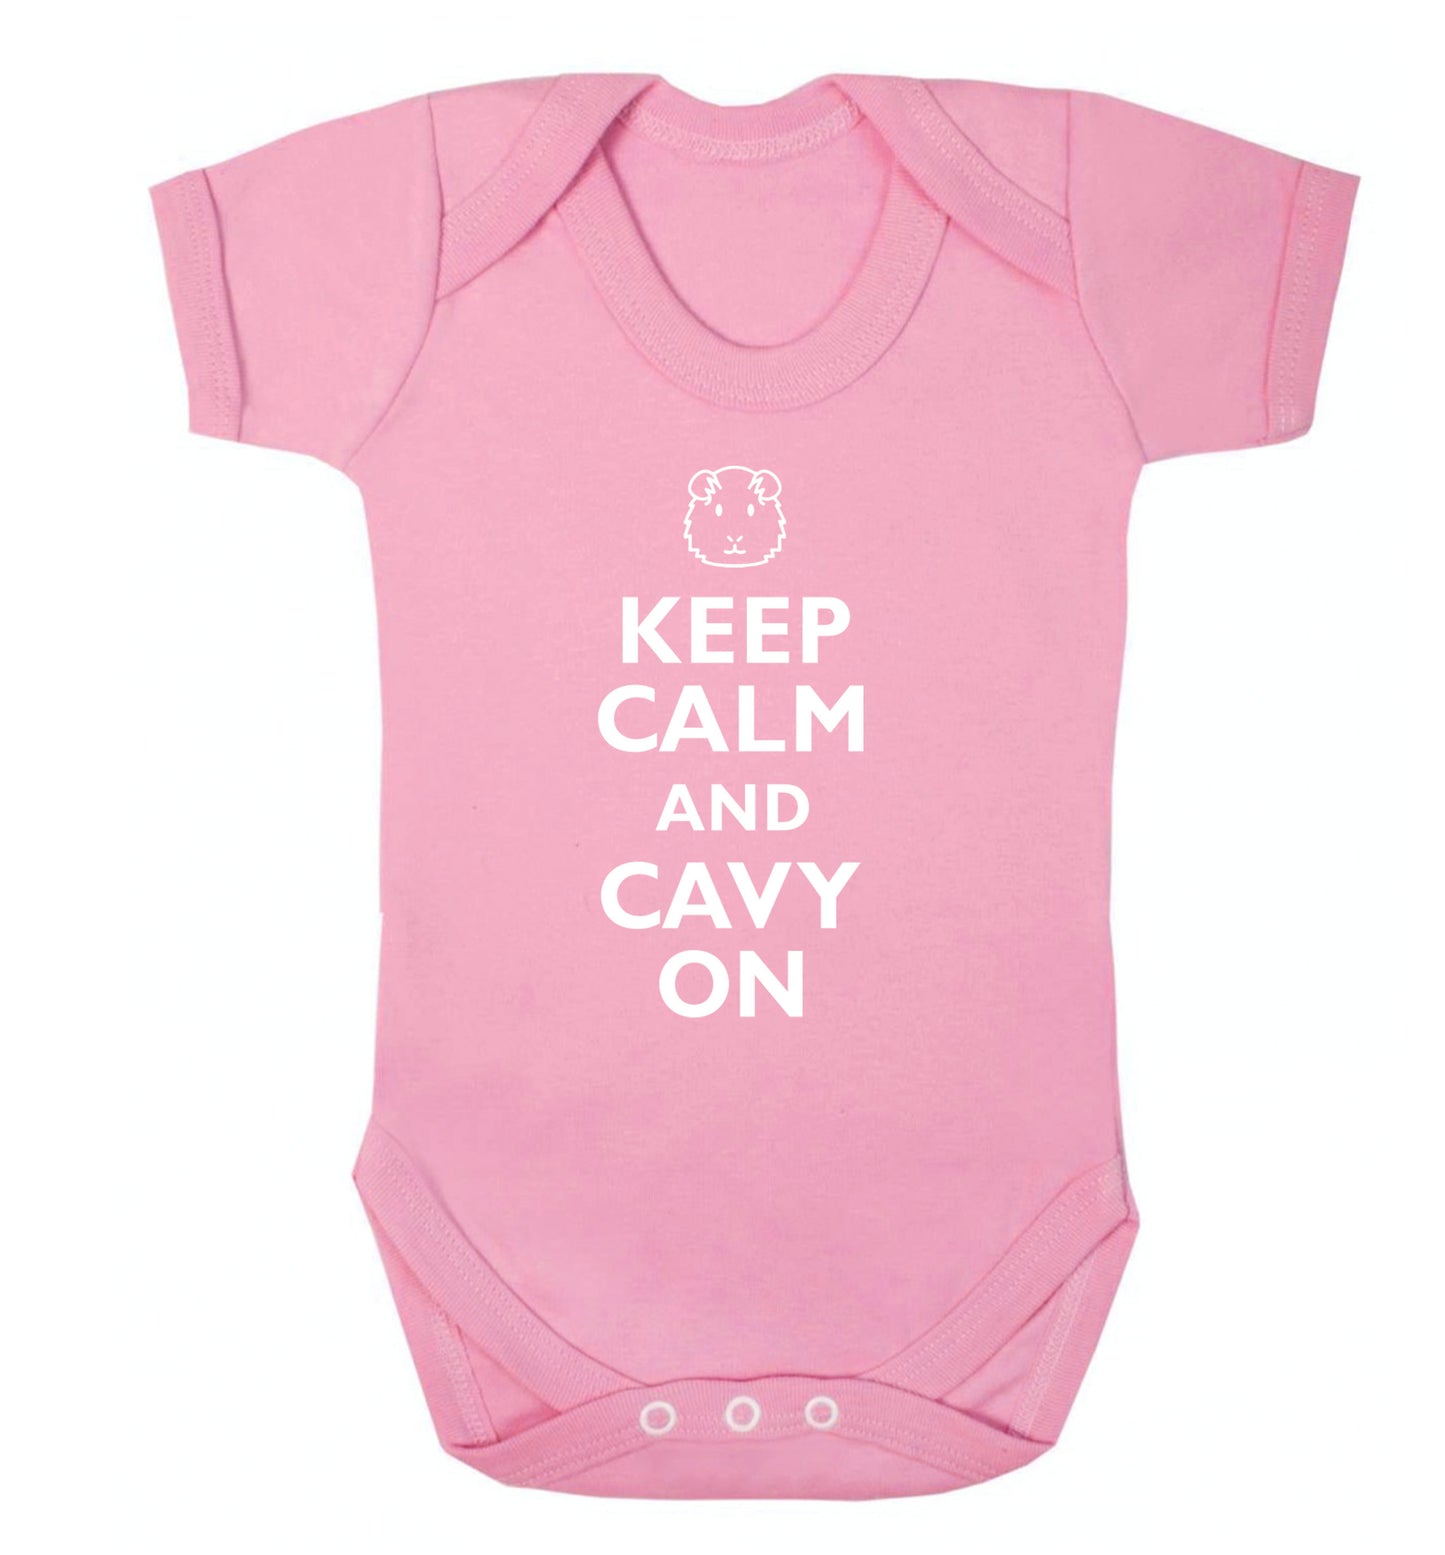 Keep calm and cavvy on Baby Vest pale pink 18-24 months